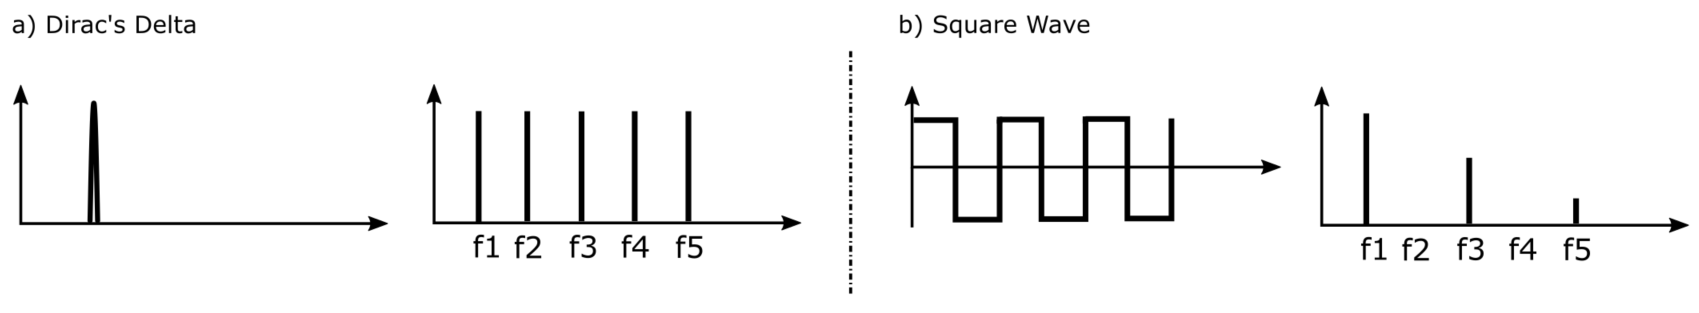 Harmonic Distribution of a Delta Function and a Square Wave